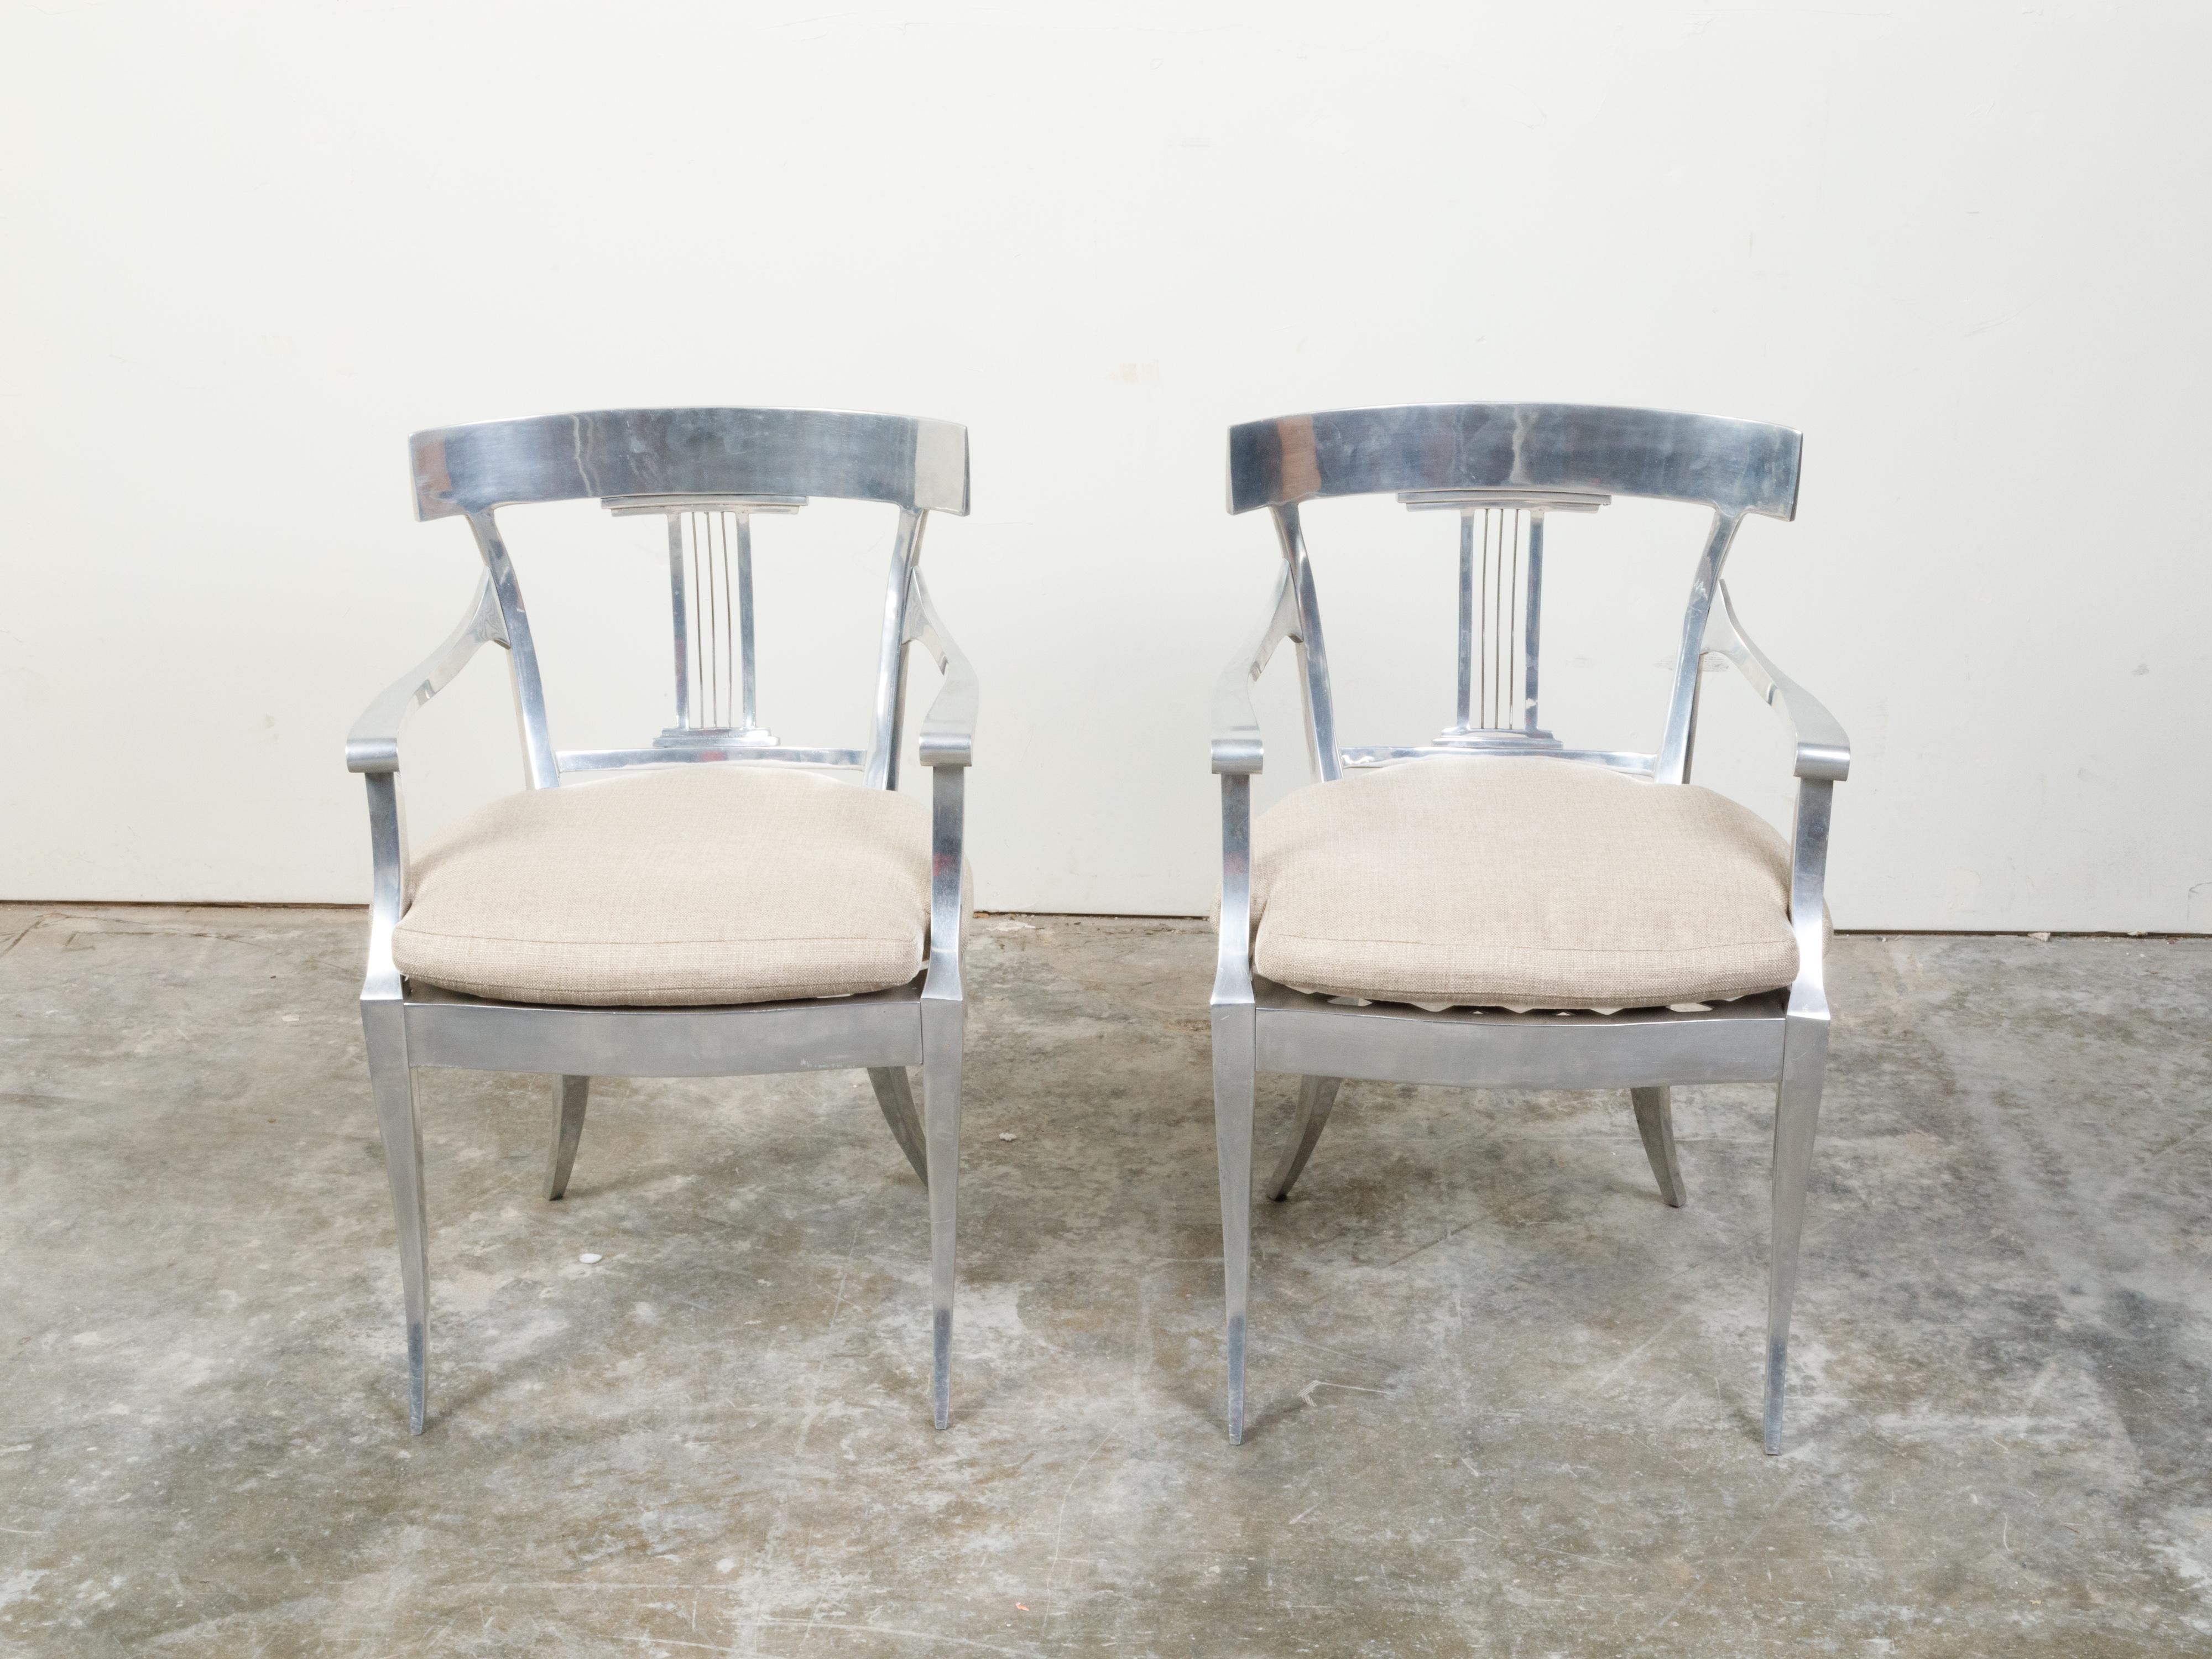 A pair of vintage steel armchairs from the mid-20th century, with curving backs, pierced splats and custom cushions. Created during the mid-century period, each of this pair of steel armchairs features an in-curving back adorned with a pierced